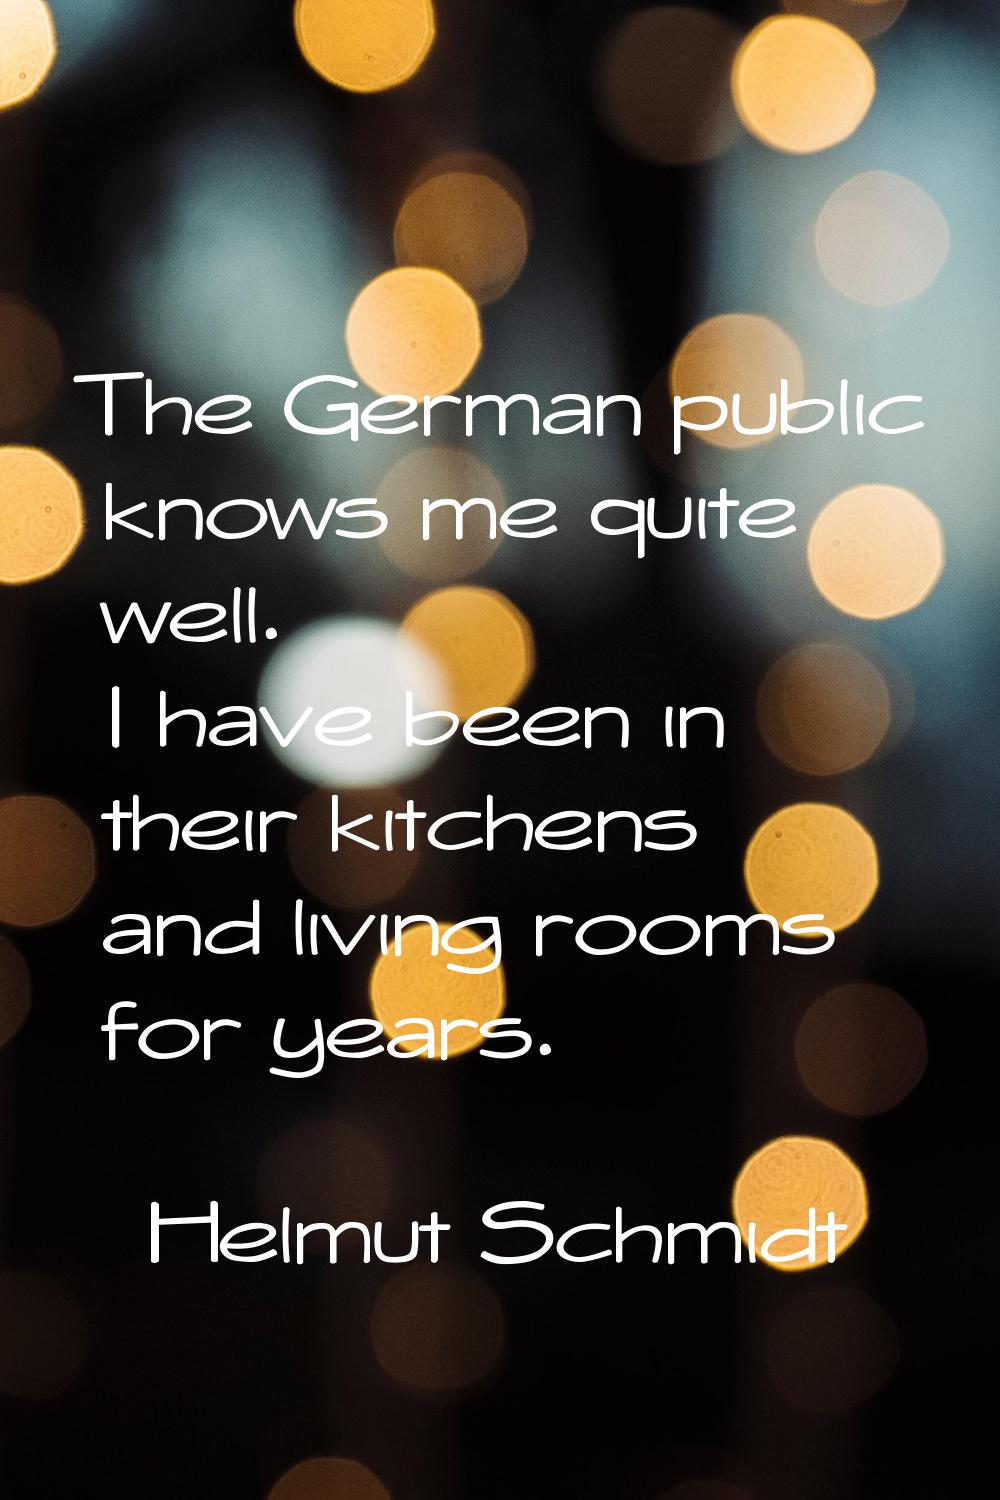 The German public knows me quite well. I have been in their kitchens and living rooms for years.